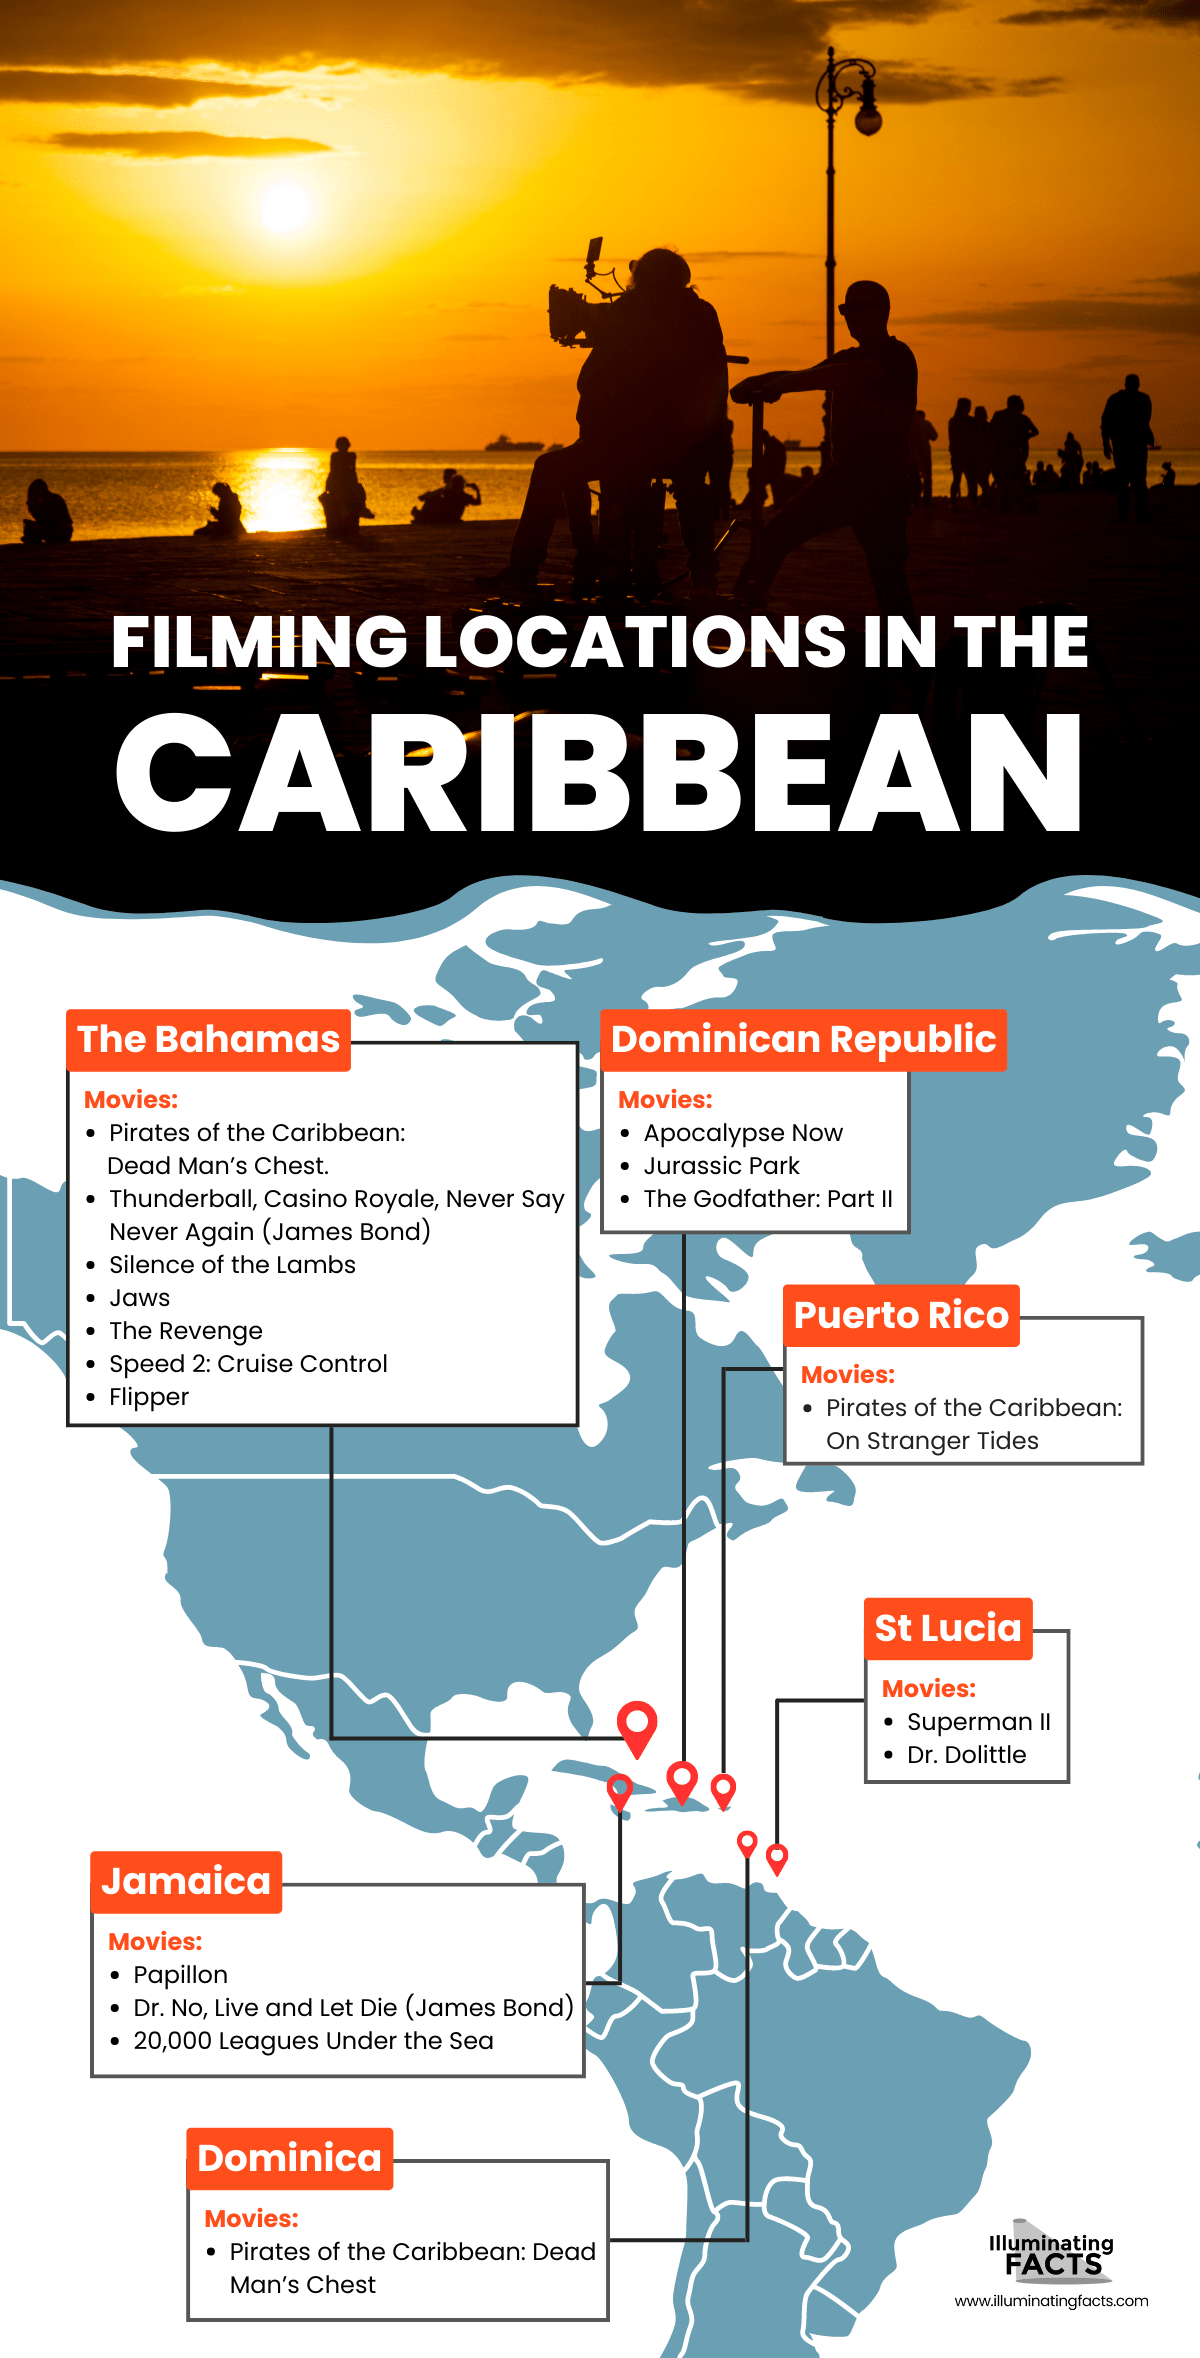 Filming Locations in the Caribbean